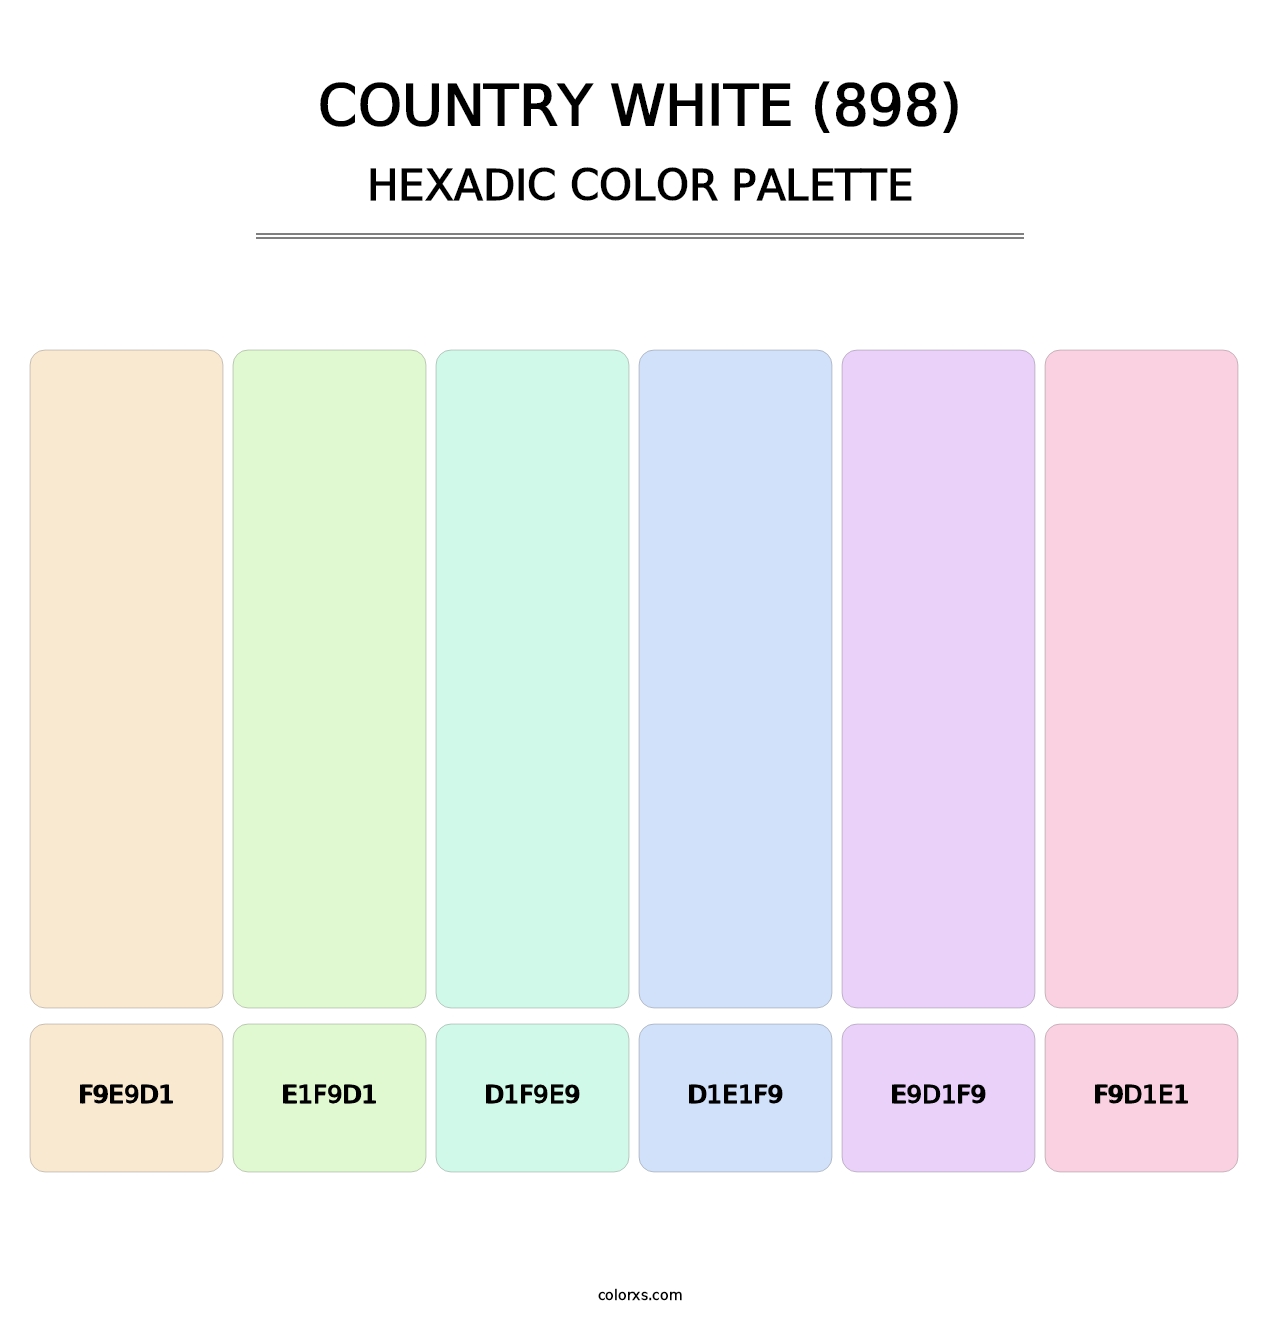 Country White (898) - Hexadic Color Palette